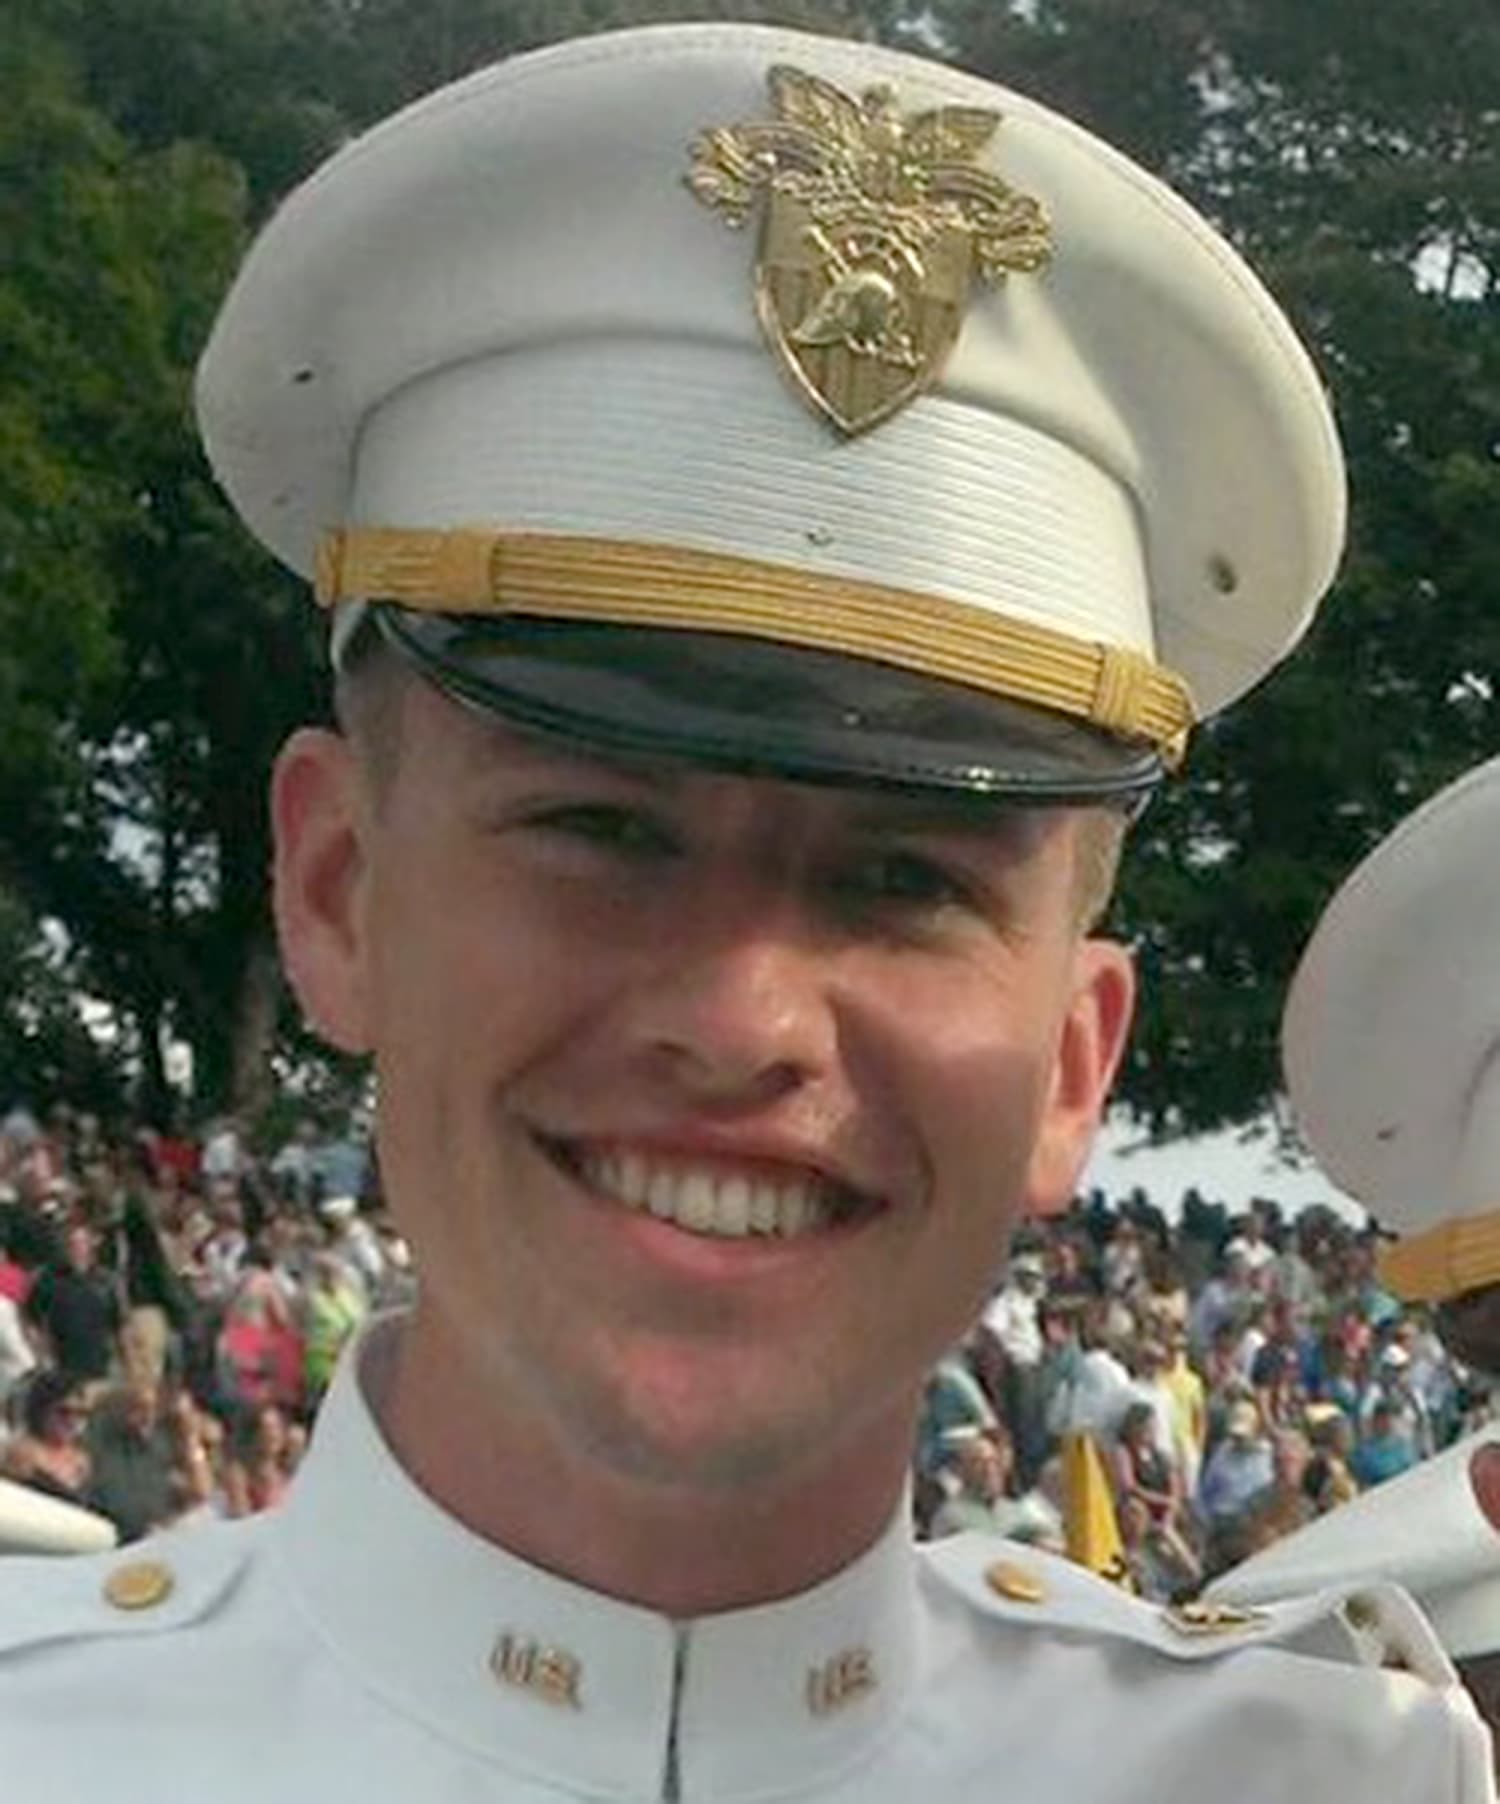 Former West Point Cadet Ricky Hester Gets 8 Years for Child Porn